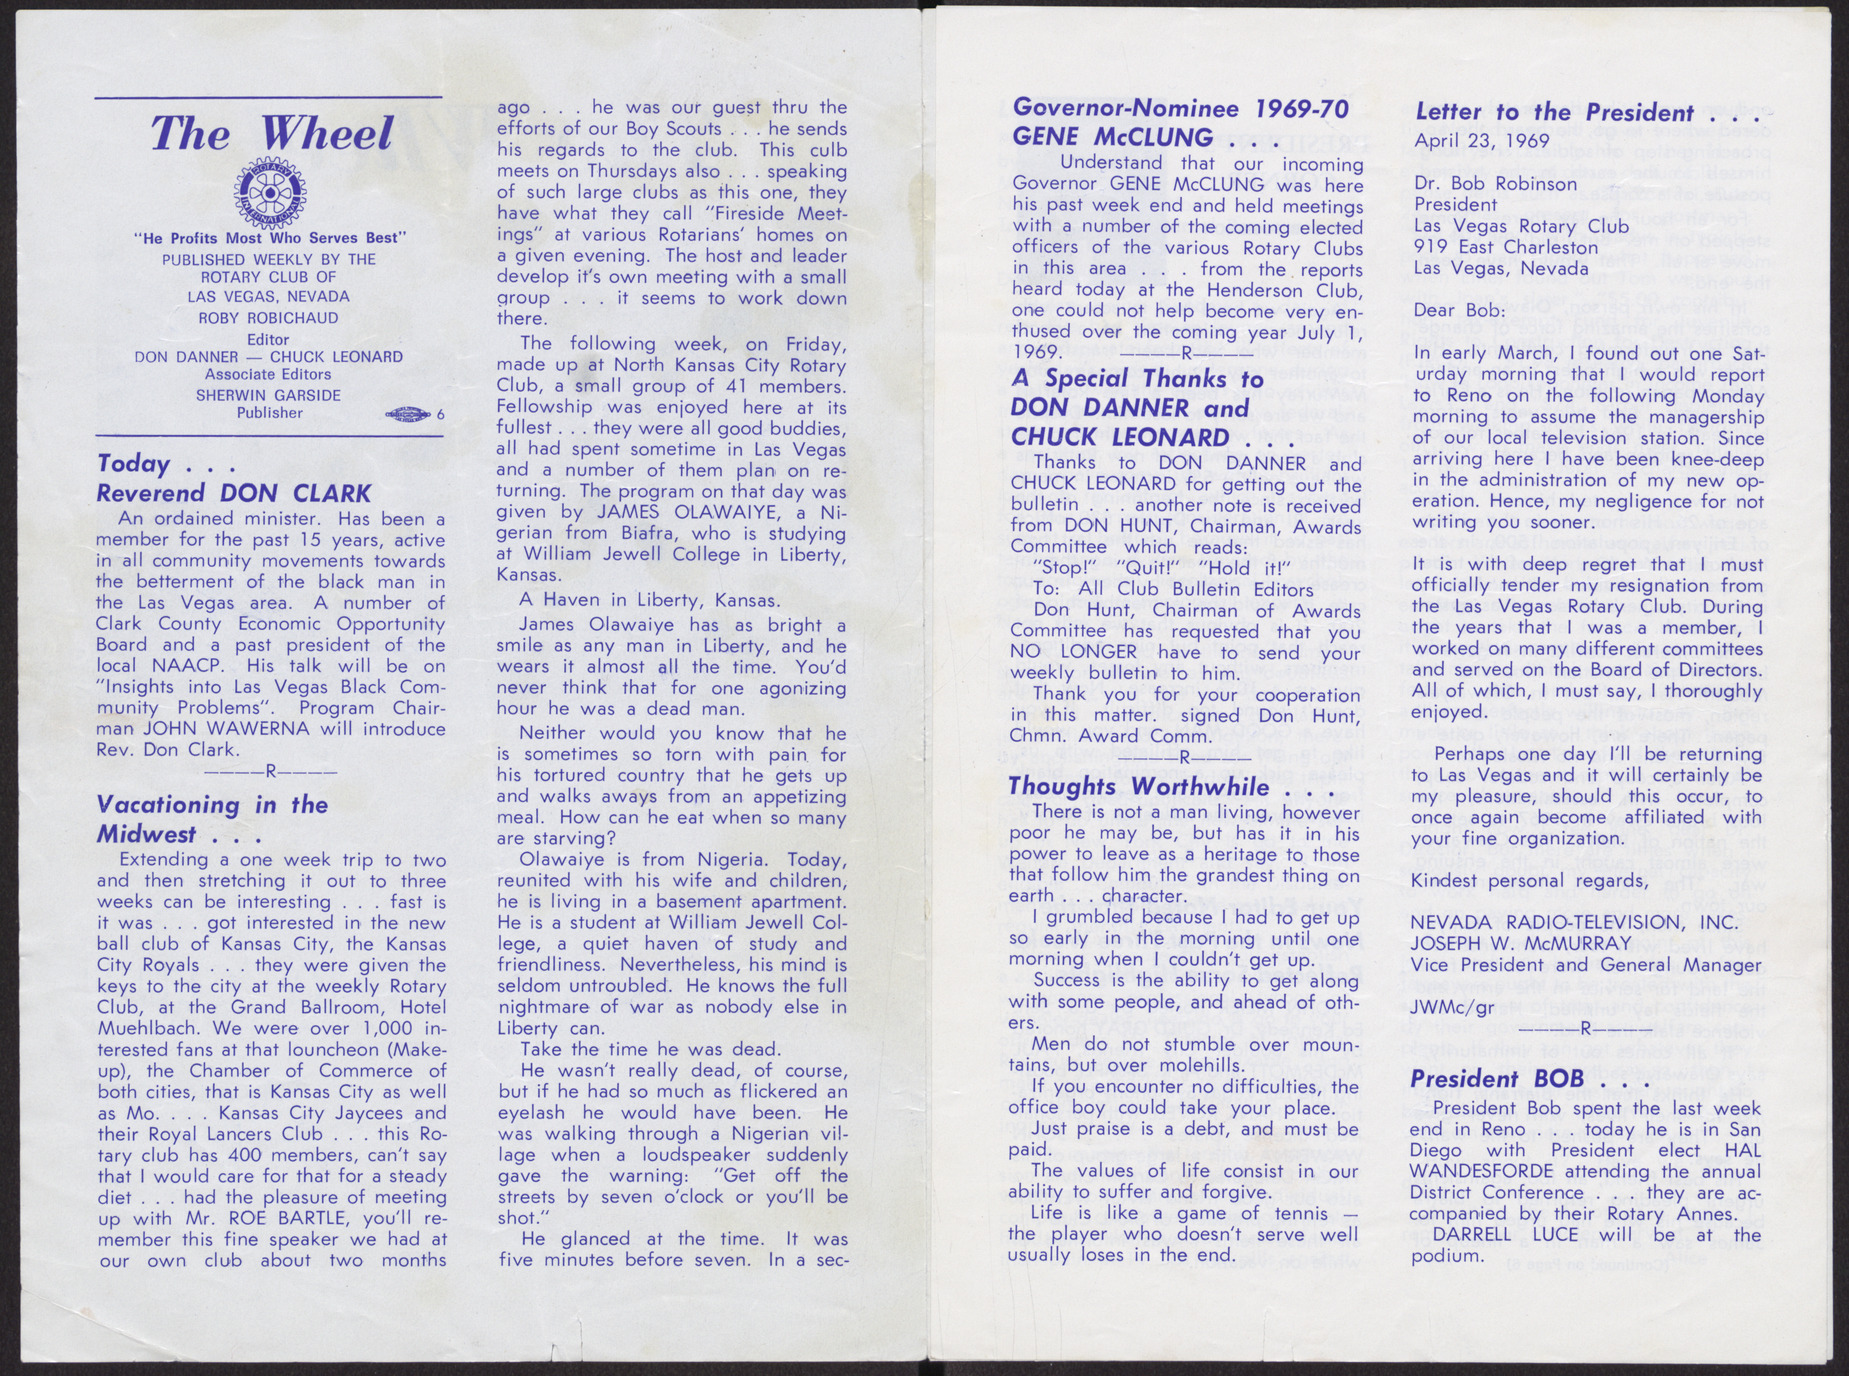 Las Vegas Rotary Club meeting program (6 pages), May 1, 1969, page 2-3